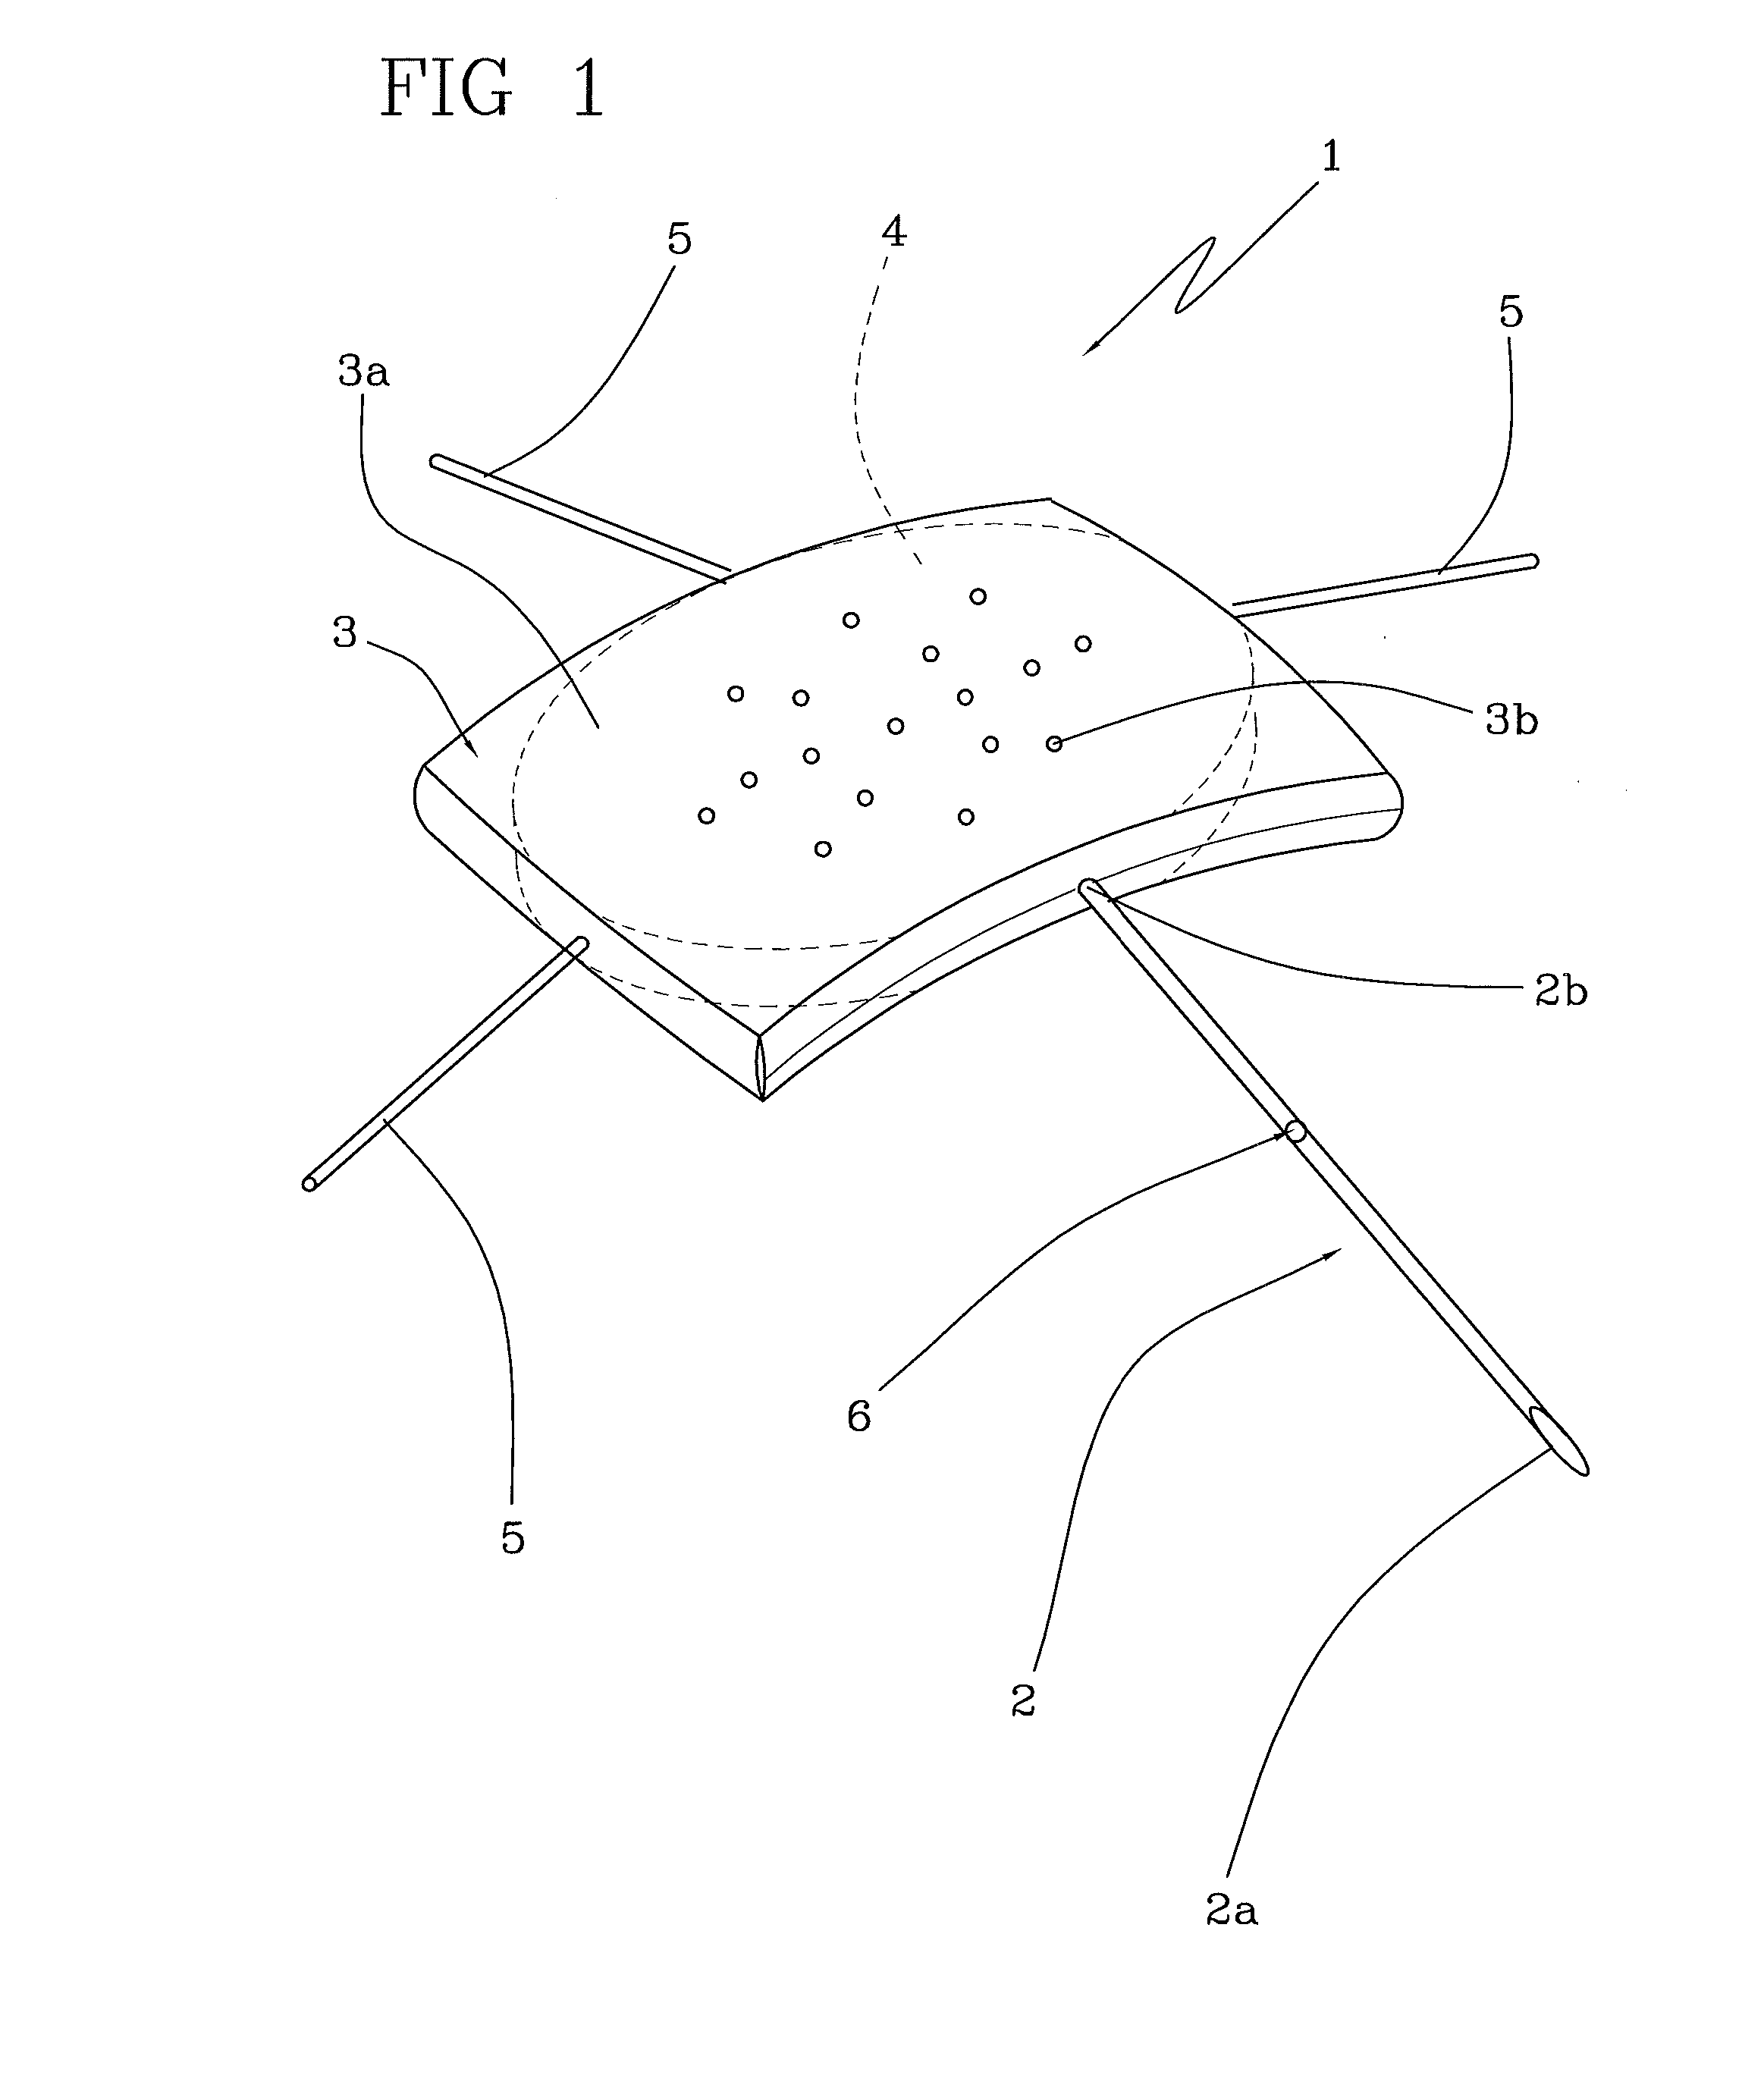 Valve device for use in glaucoma surgery